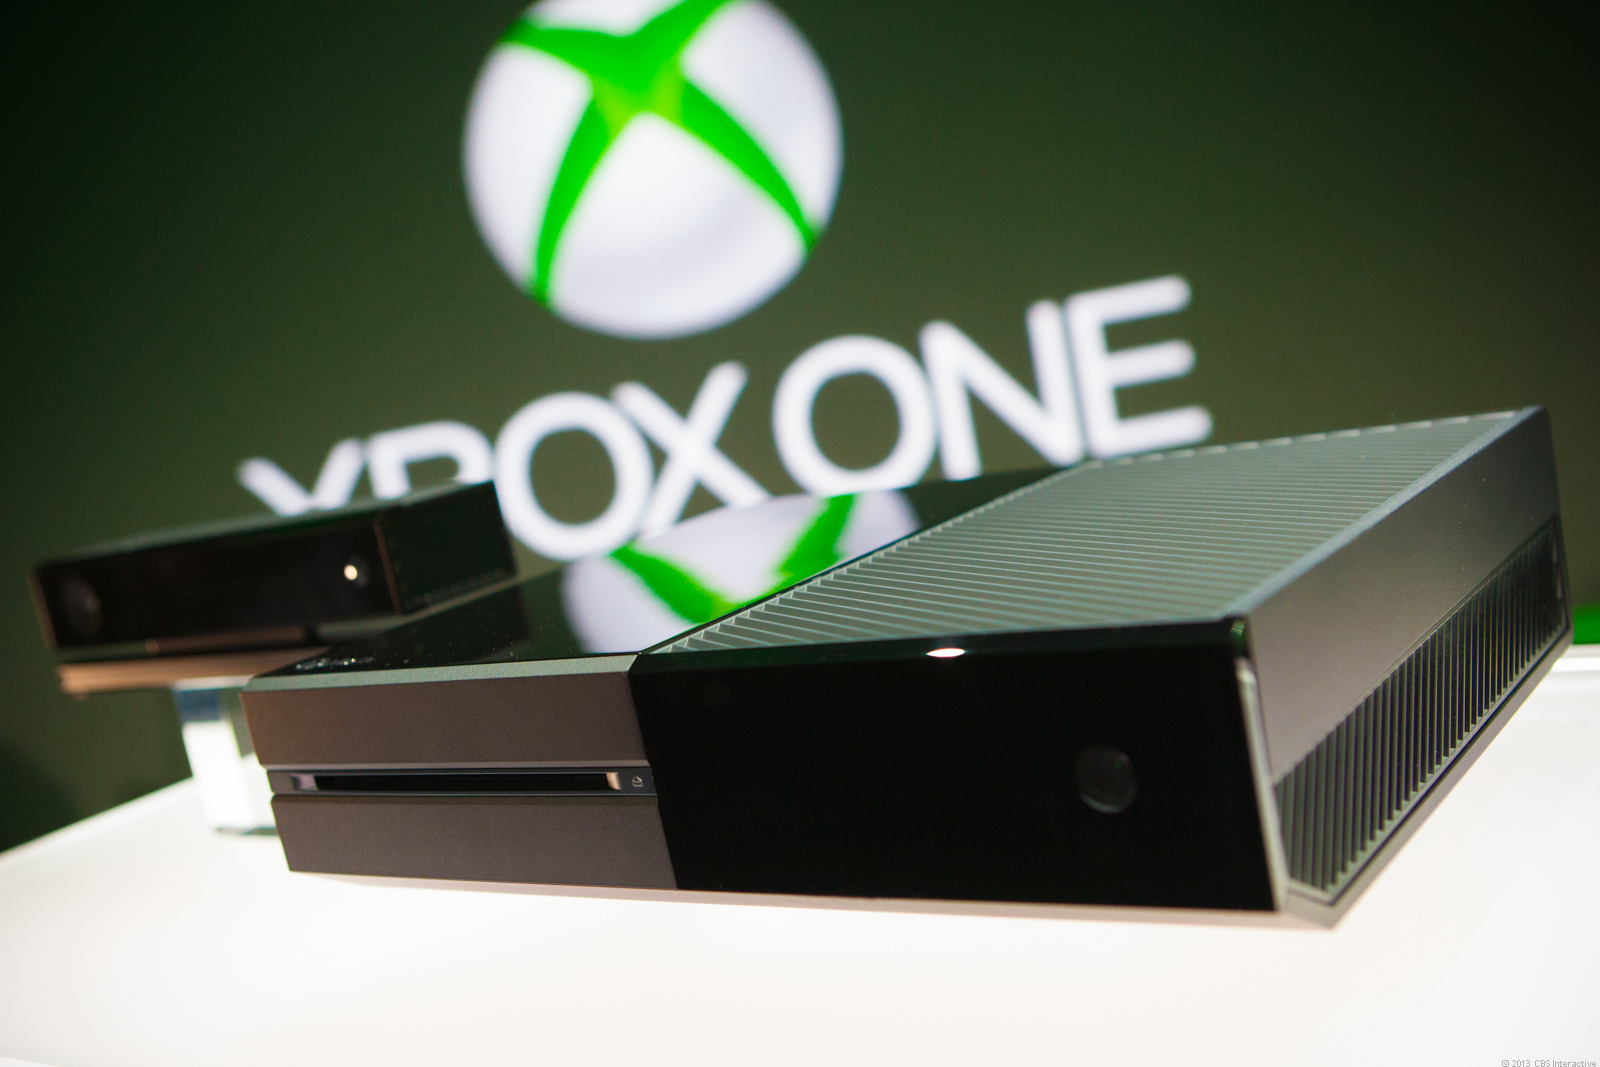 Xbox One is launched with new controller and new Kinect